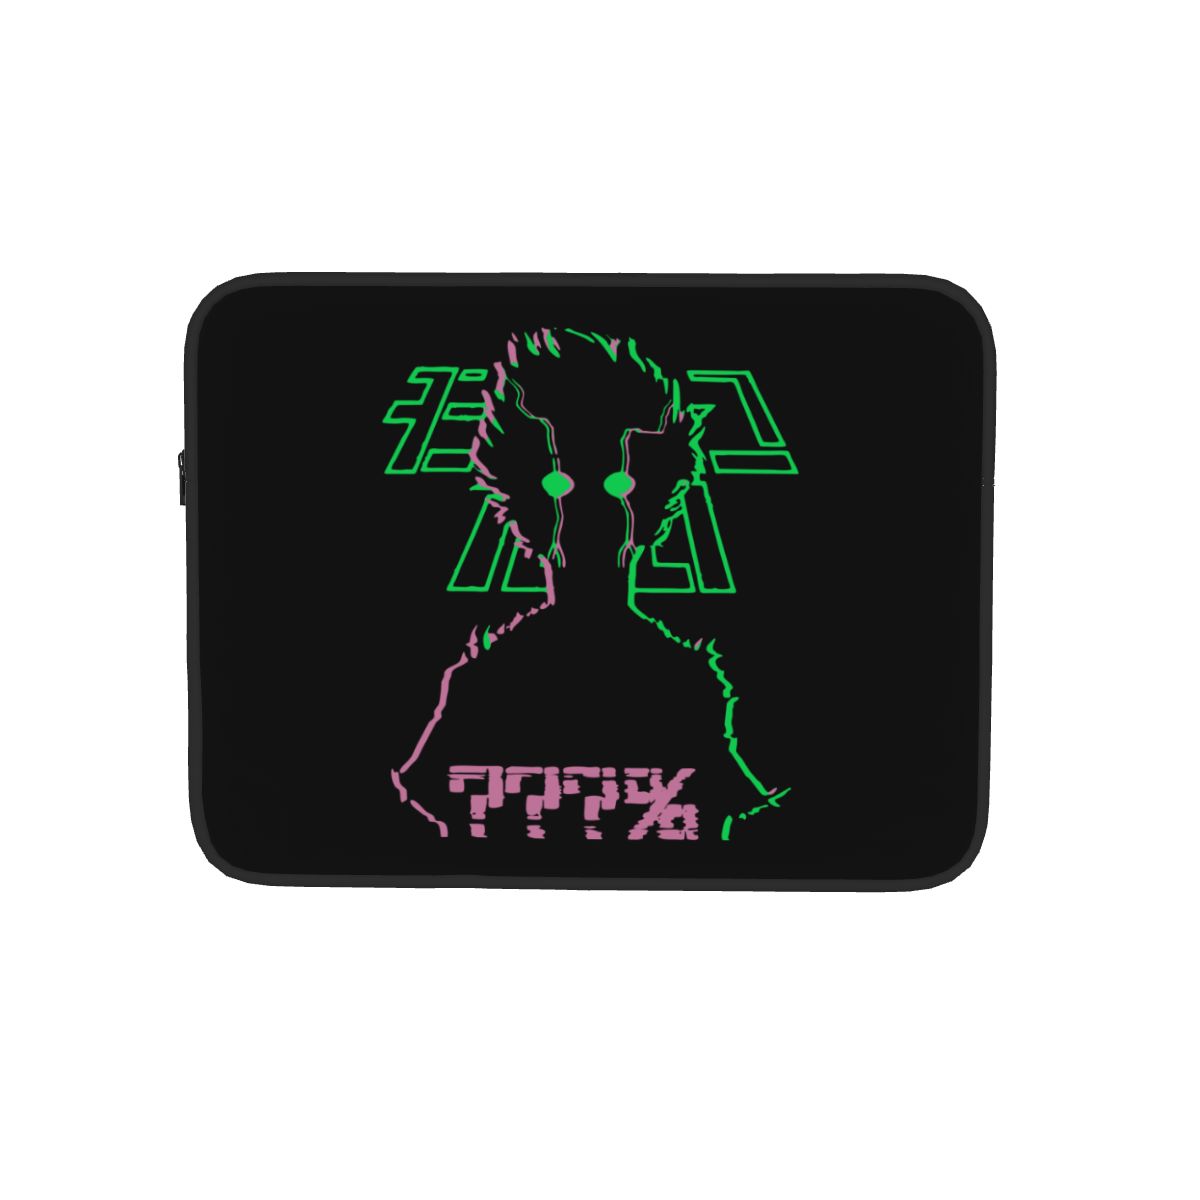 Ensure your devices are protected at all times| If you are looking for more Mob Psycho 100 Merch , We have it all! | Check out all our Anime Merch now!